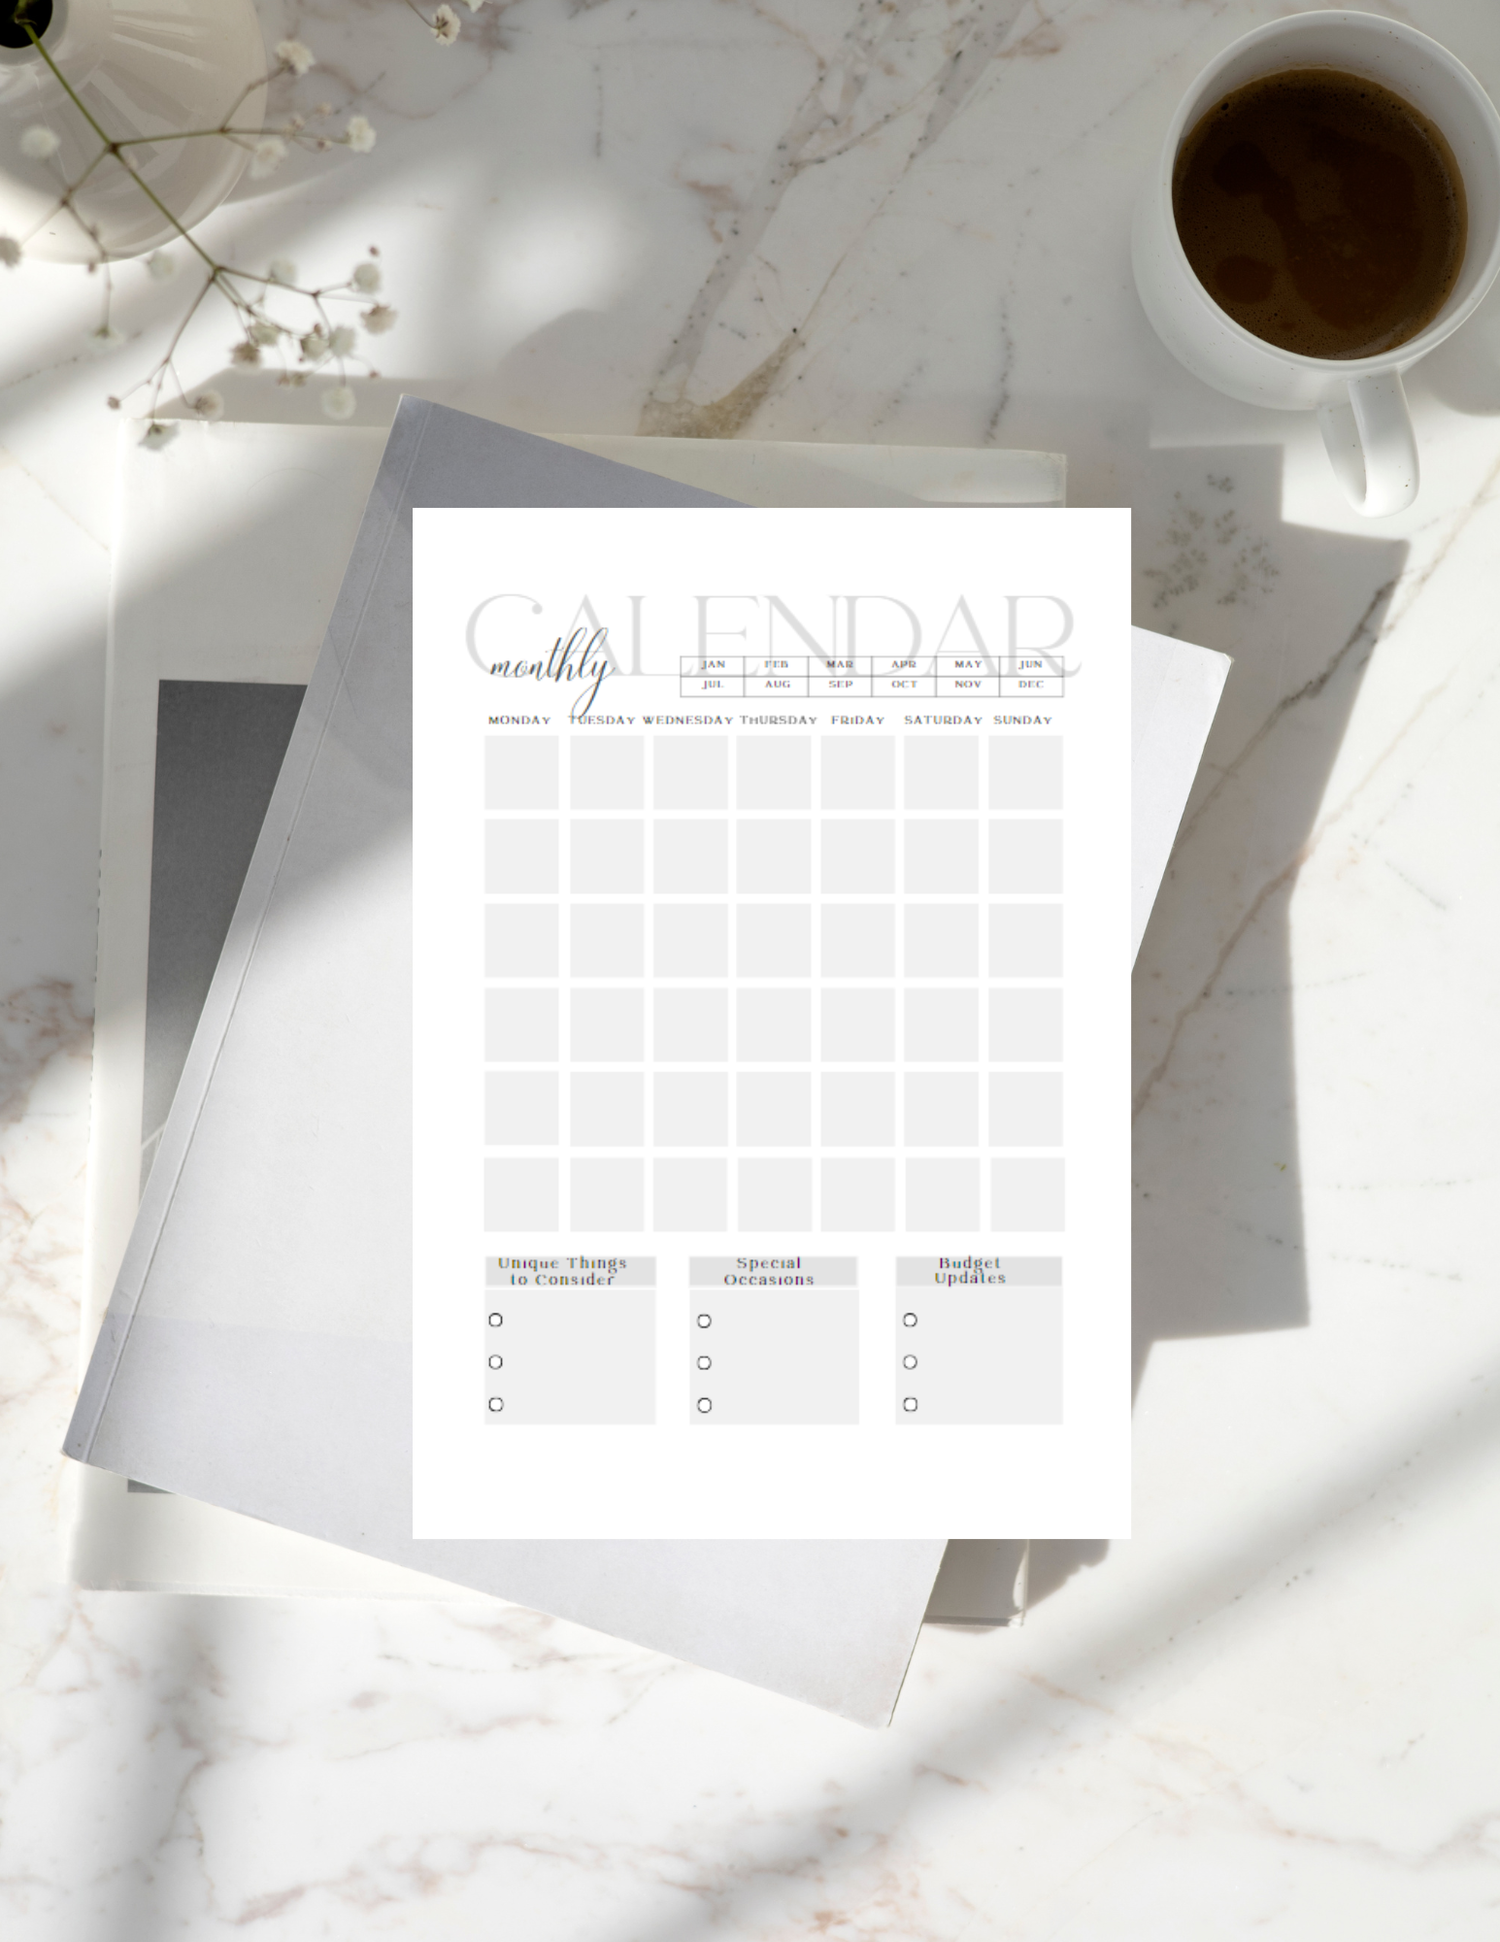 Budget planner page design template with Dandelion print. Monthly